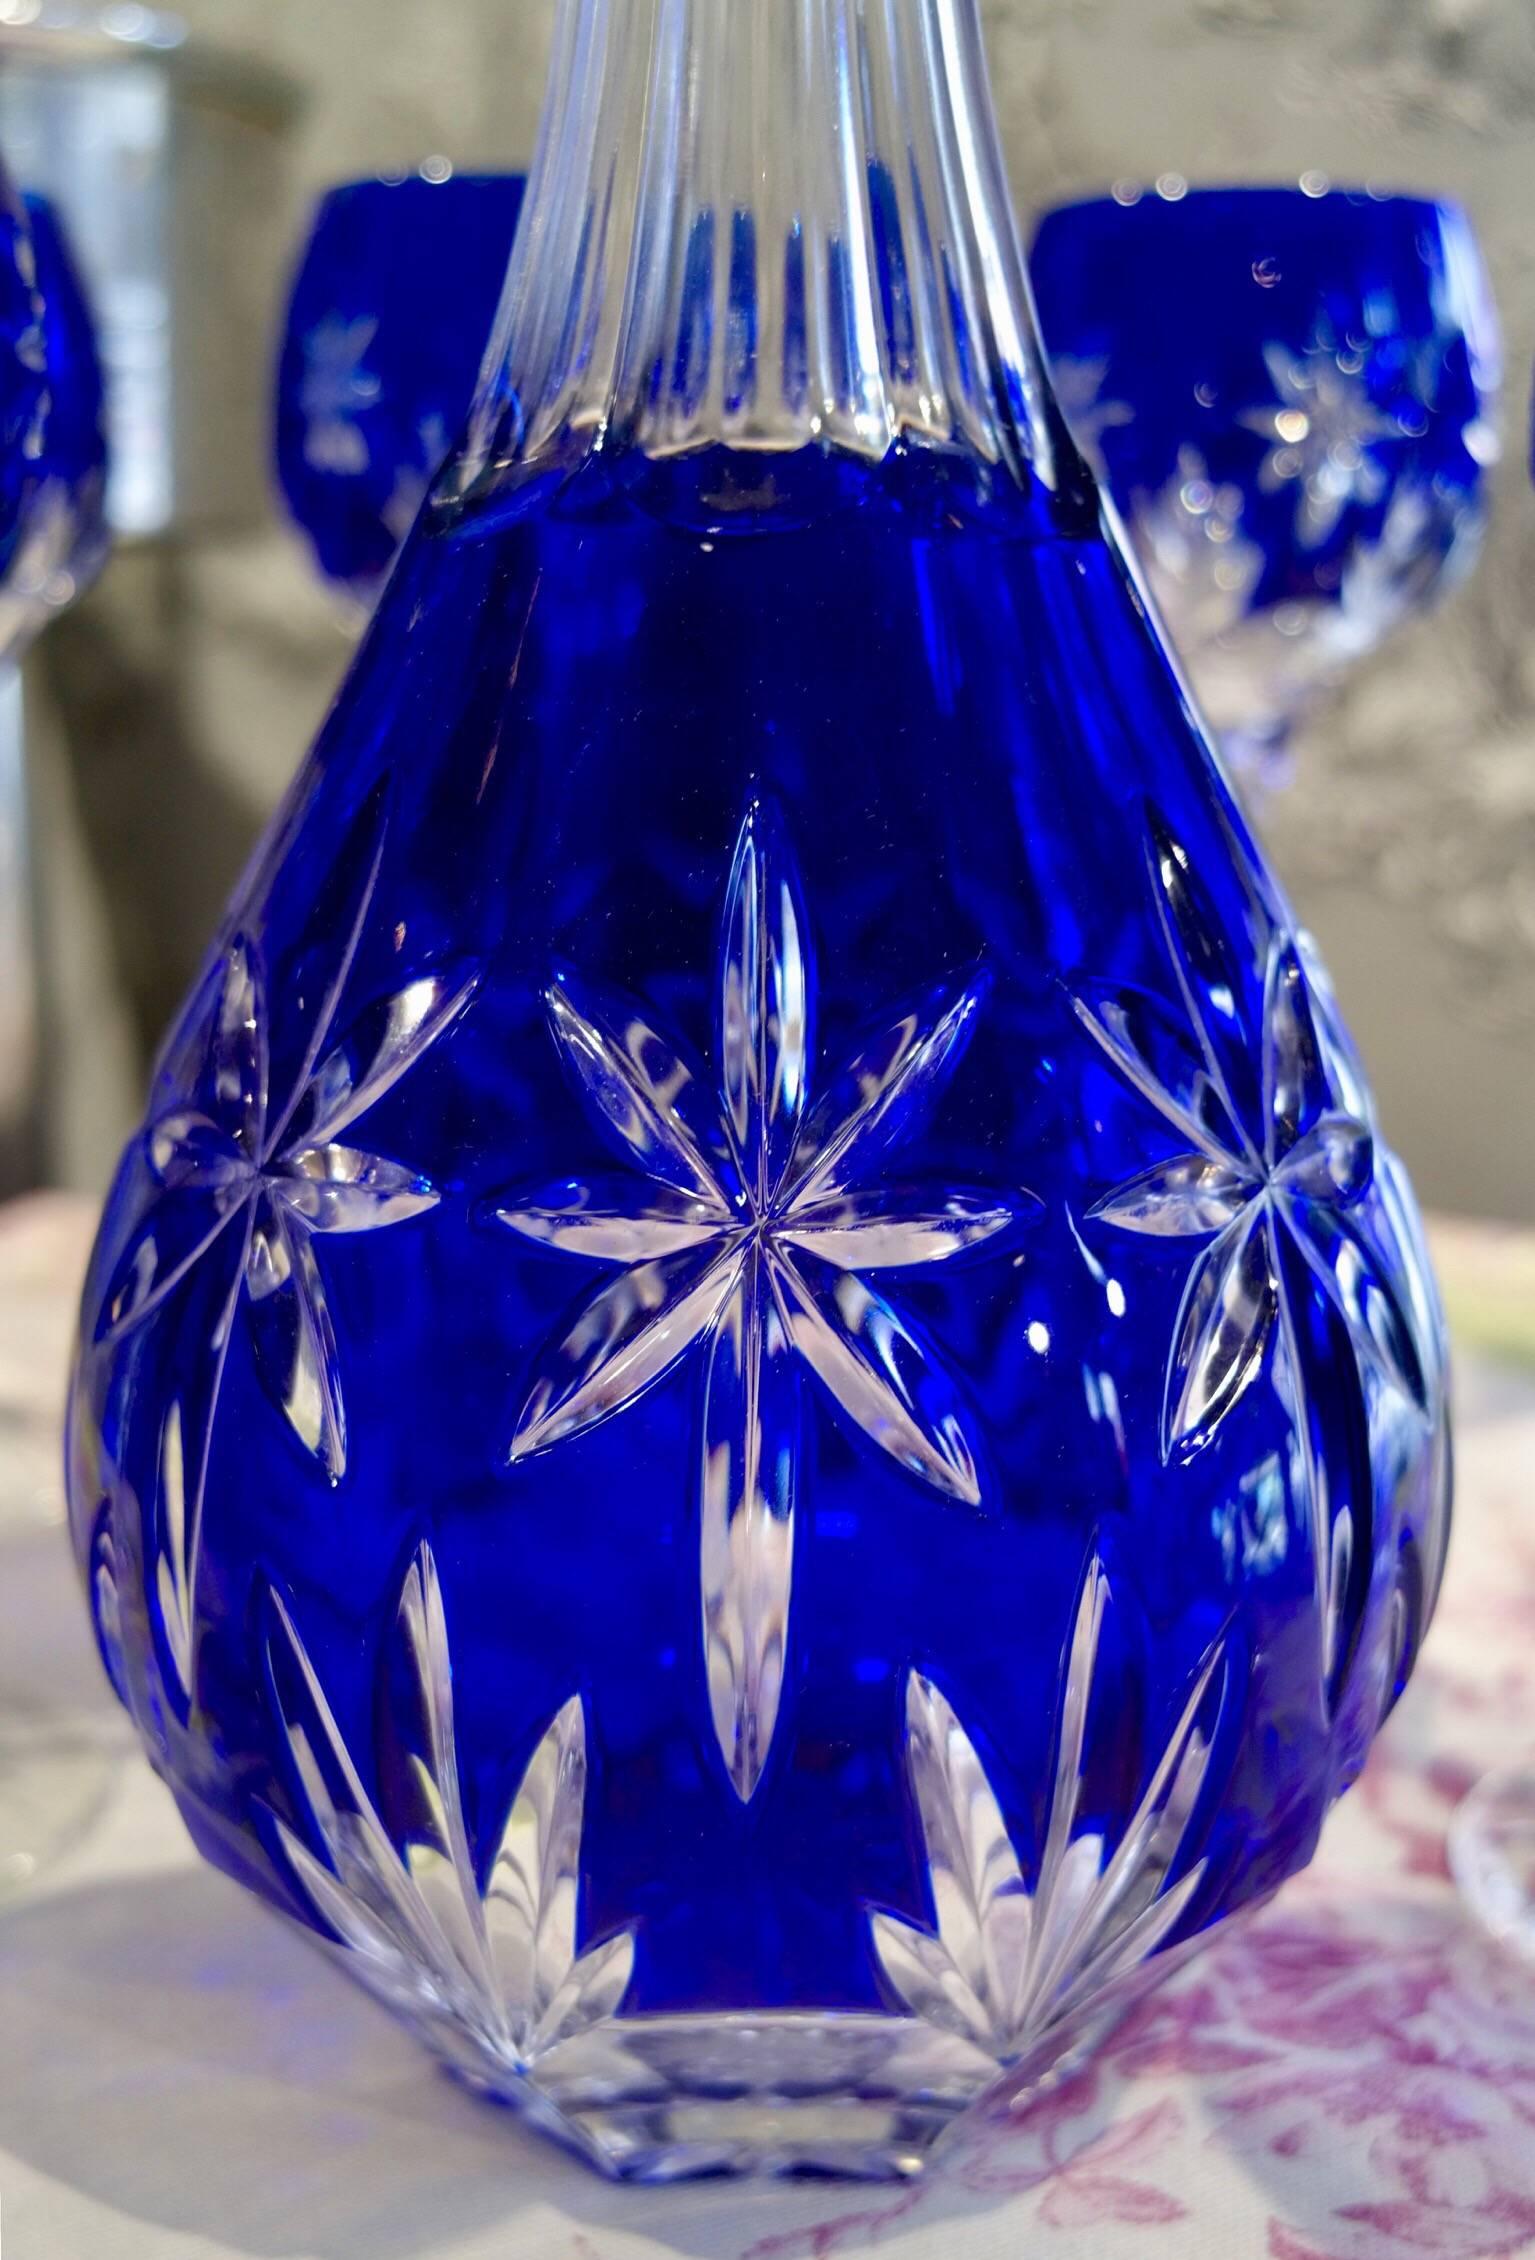 European Blue Crystal Engraved Service, One Carafe and 12 Stemmed Glasses, circa 1950